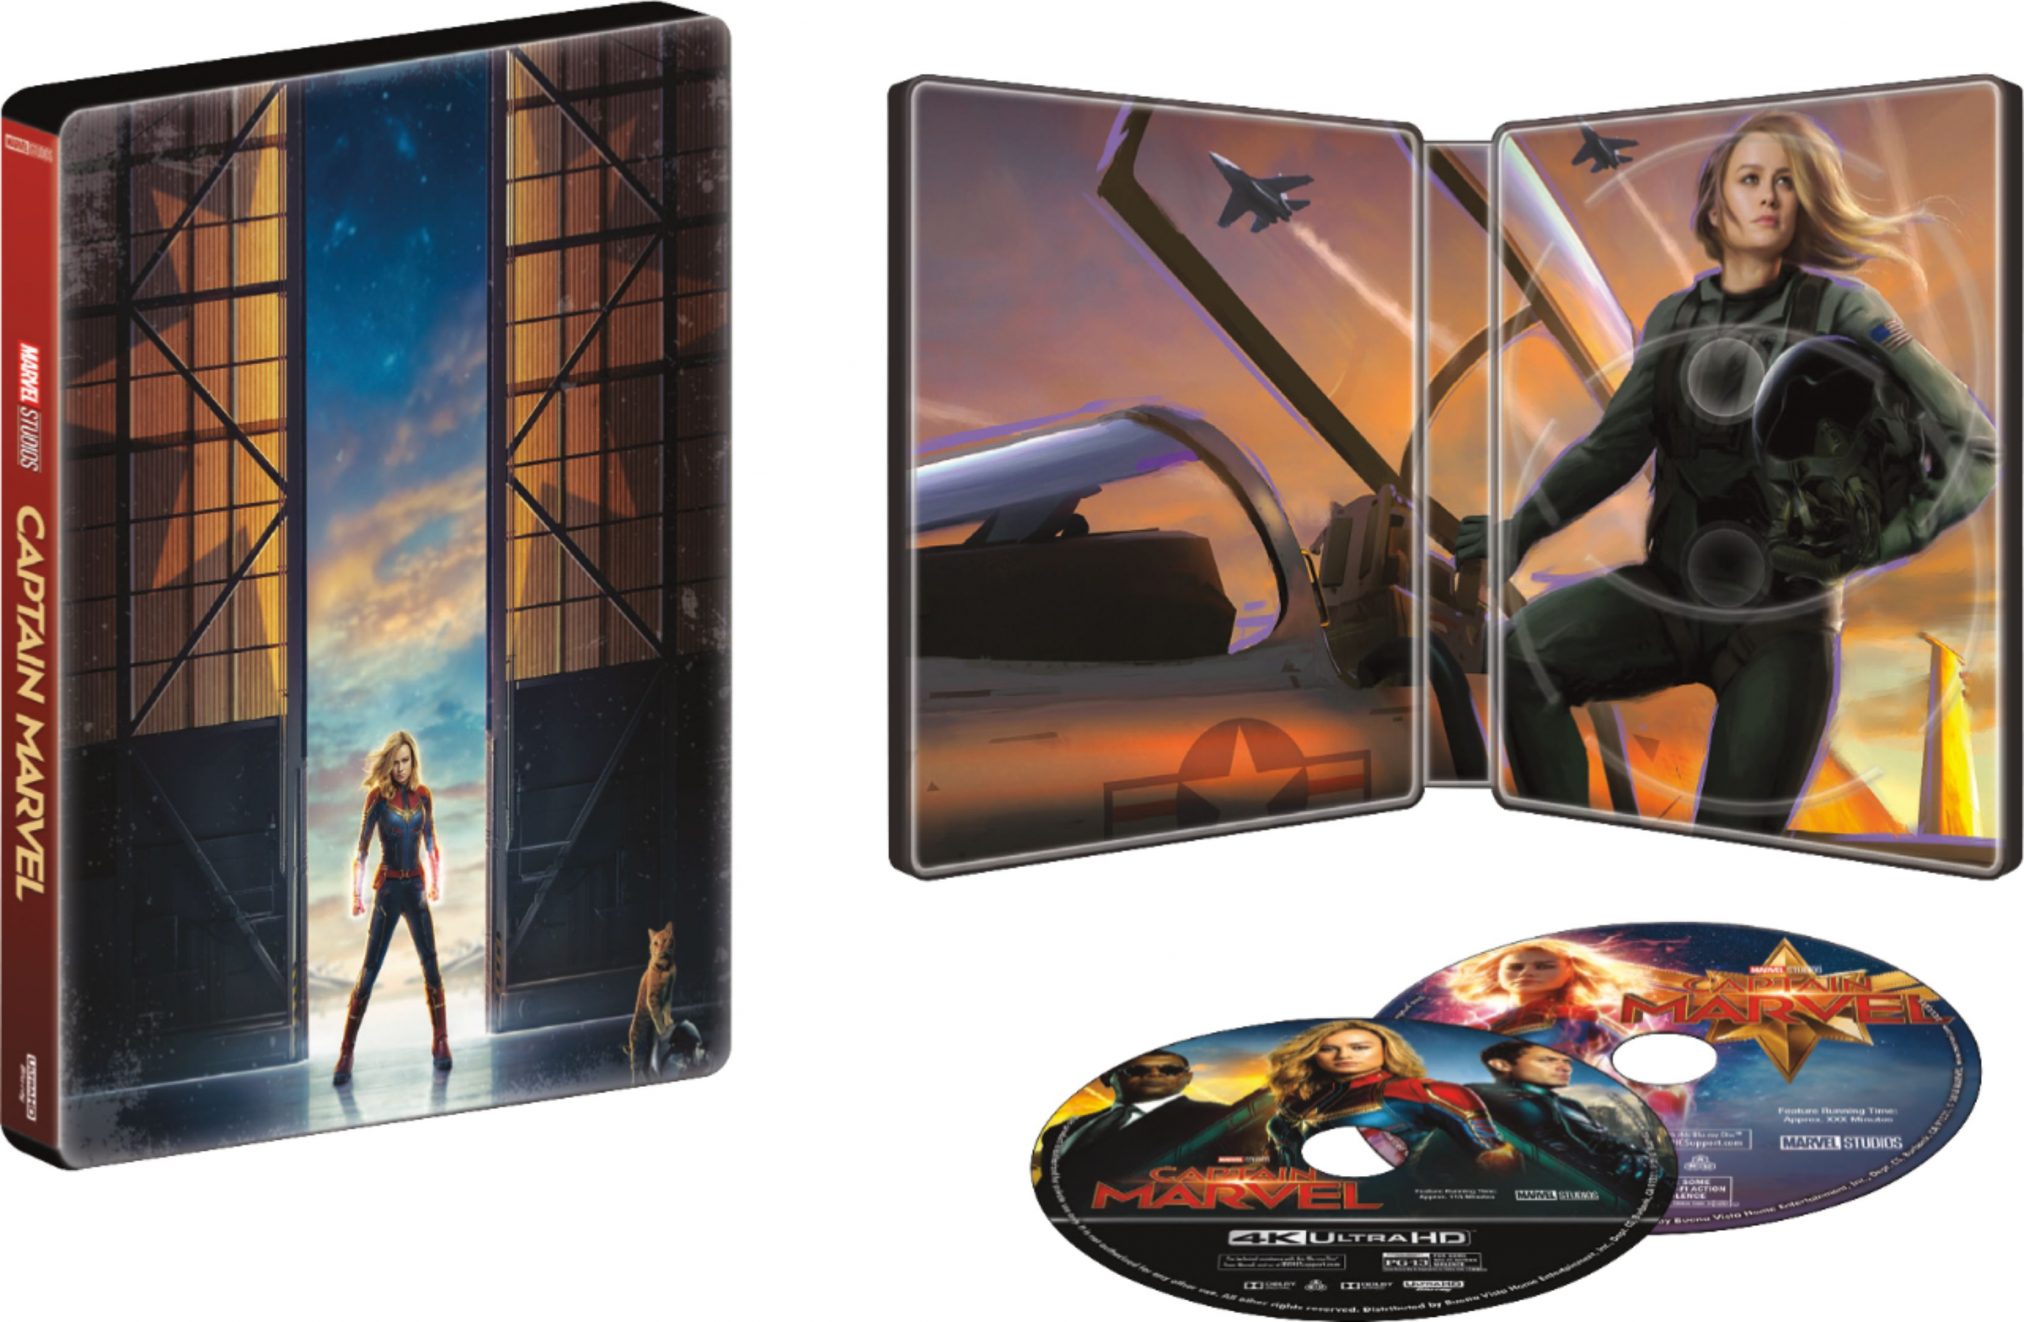 Captain Marvel is now available! Get the Collectible SteelBook format at #BestBuy today! #CaptainMarvel